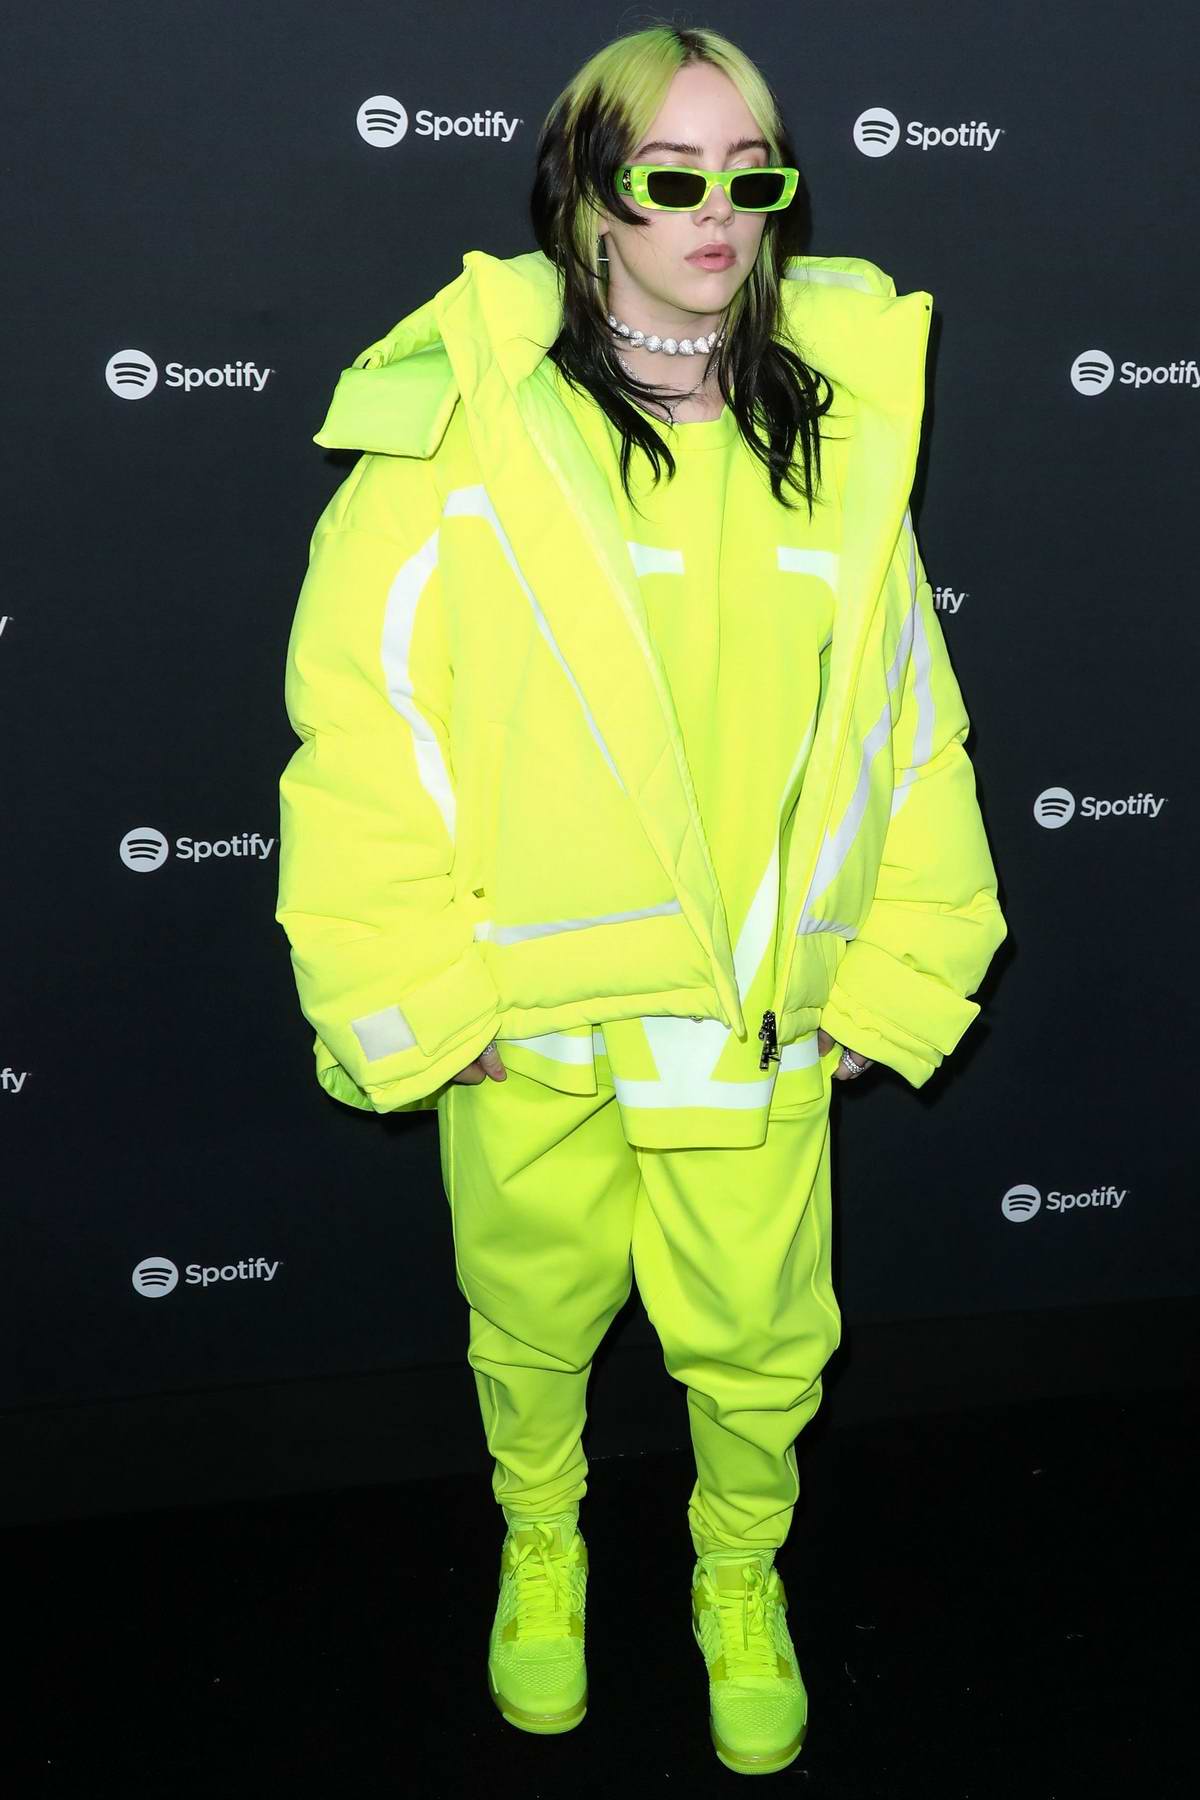 billie eilish attends the spotify 'best new artist' party 2020 in los ...